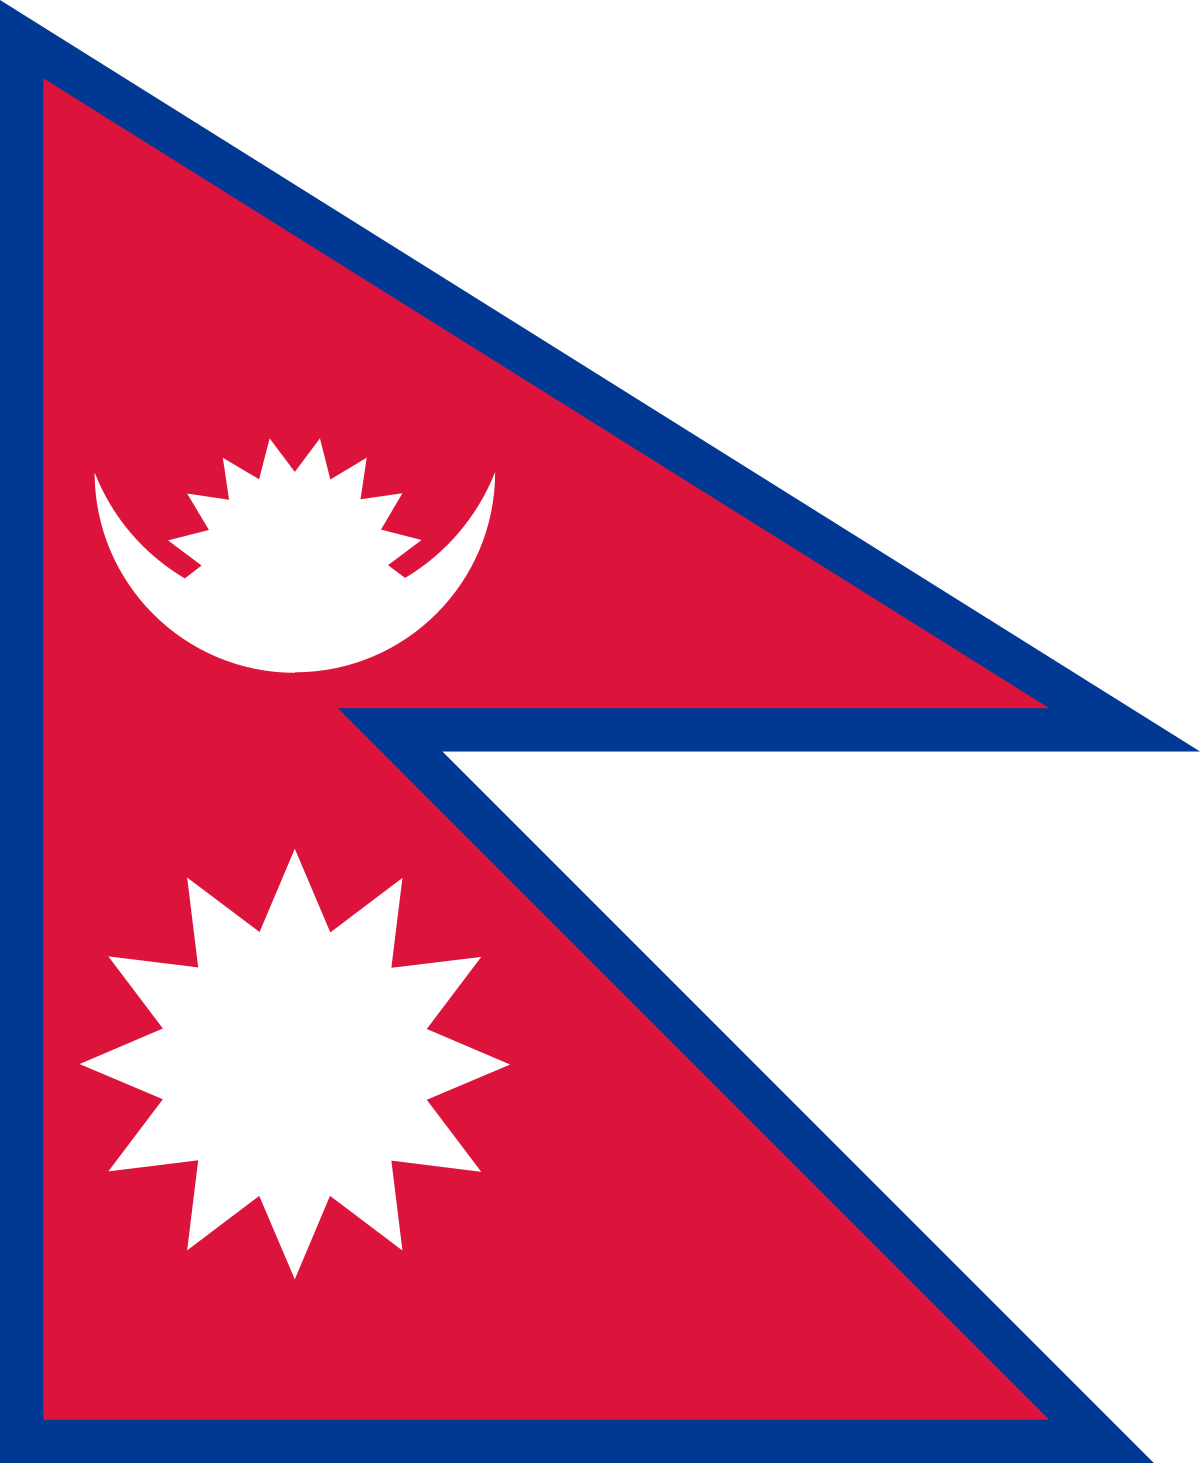 Pentagon with Two Red Triangles Logo - Flag of Nepal